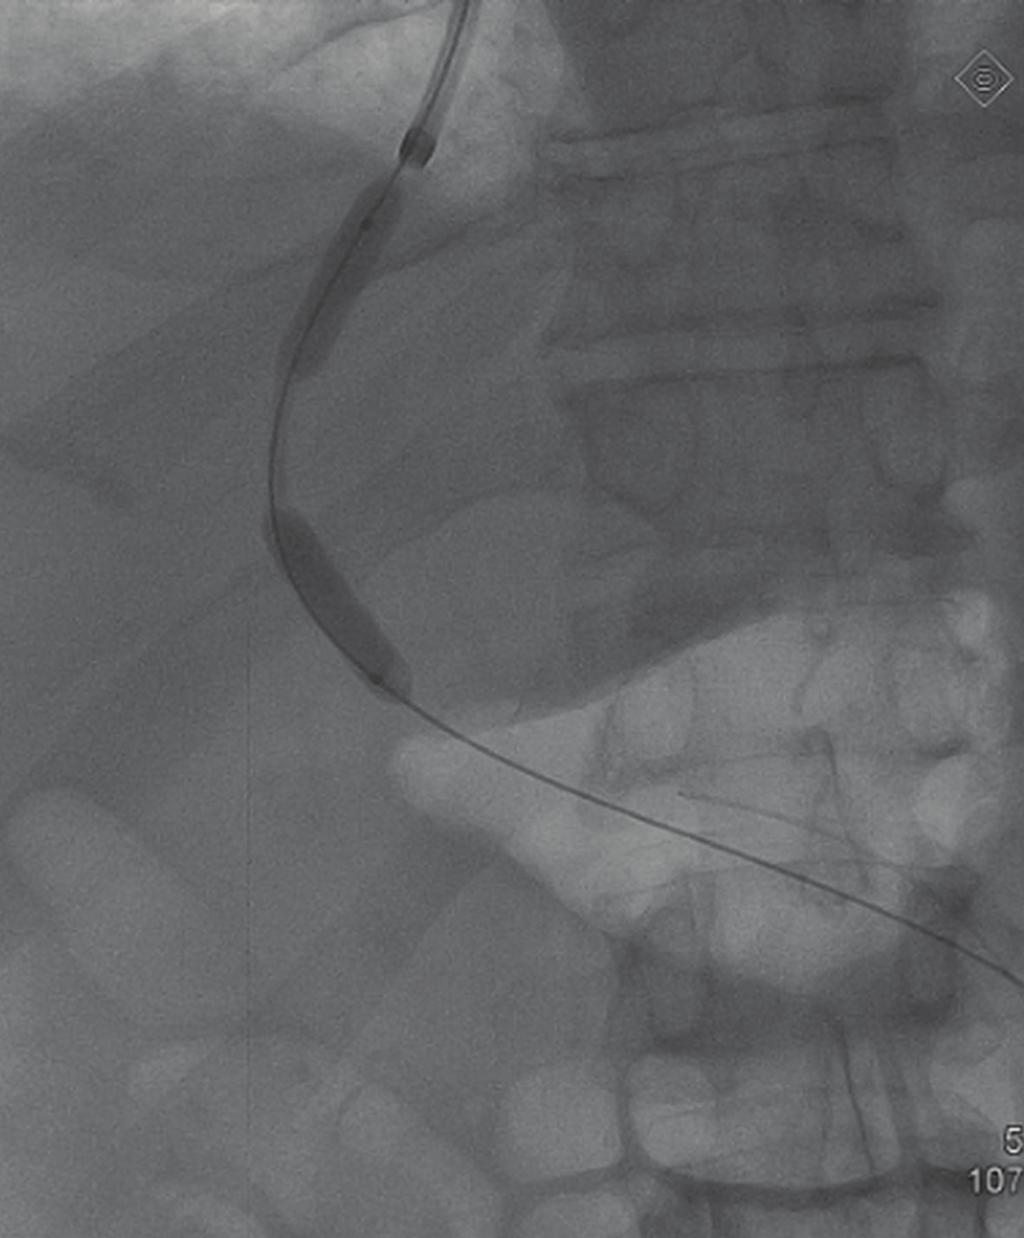 Technical Aspects TIPS is a hemodynamic equivalent of a side-to-side small diameter surgical portacaval shunt.